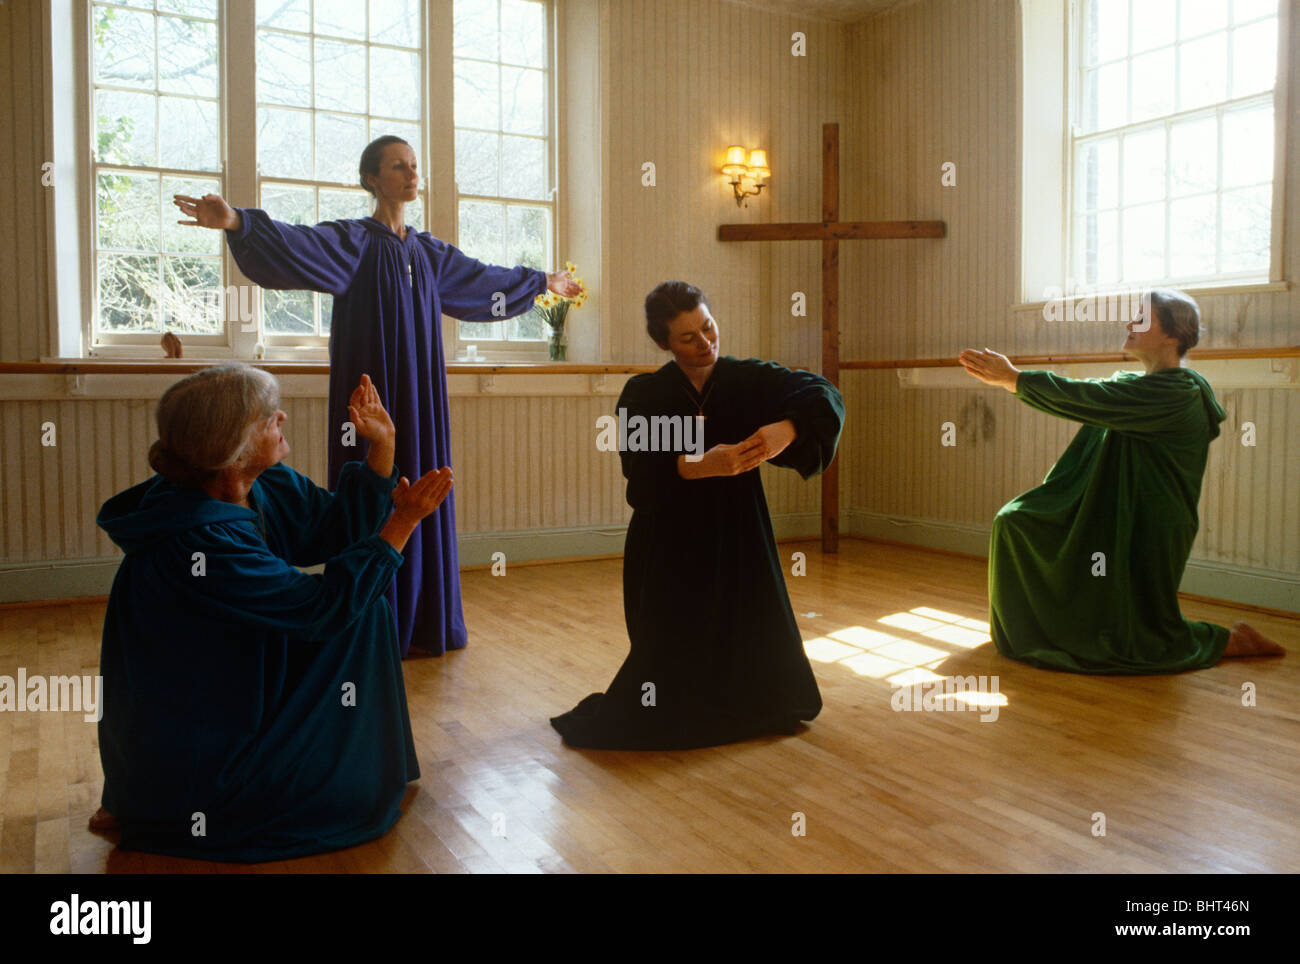 Members of the evangelical Sacred Dance Ministry (Group) perform a scene from the biblical nativity scene. Stock Photo